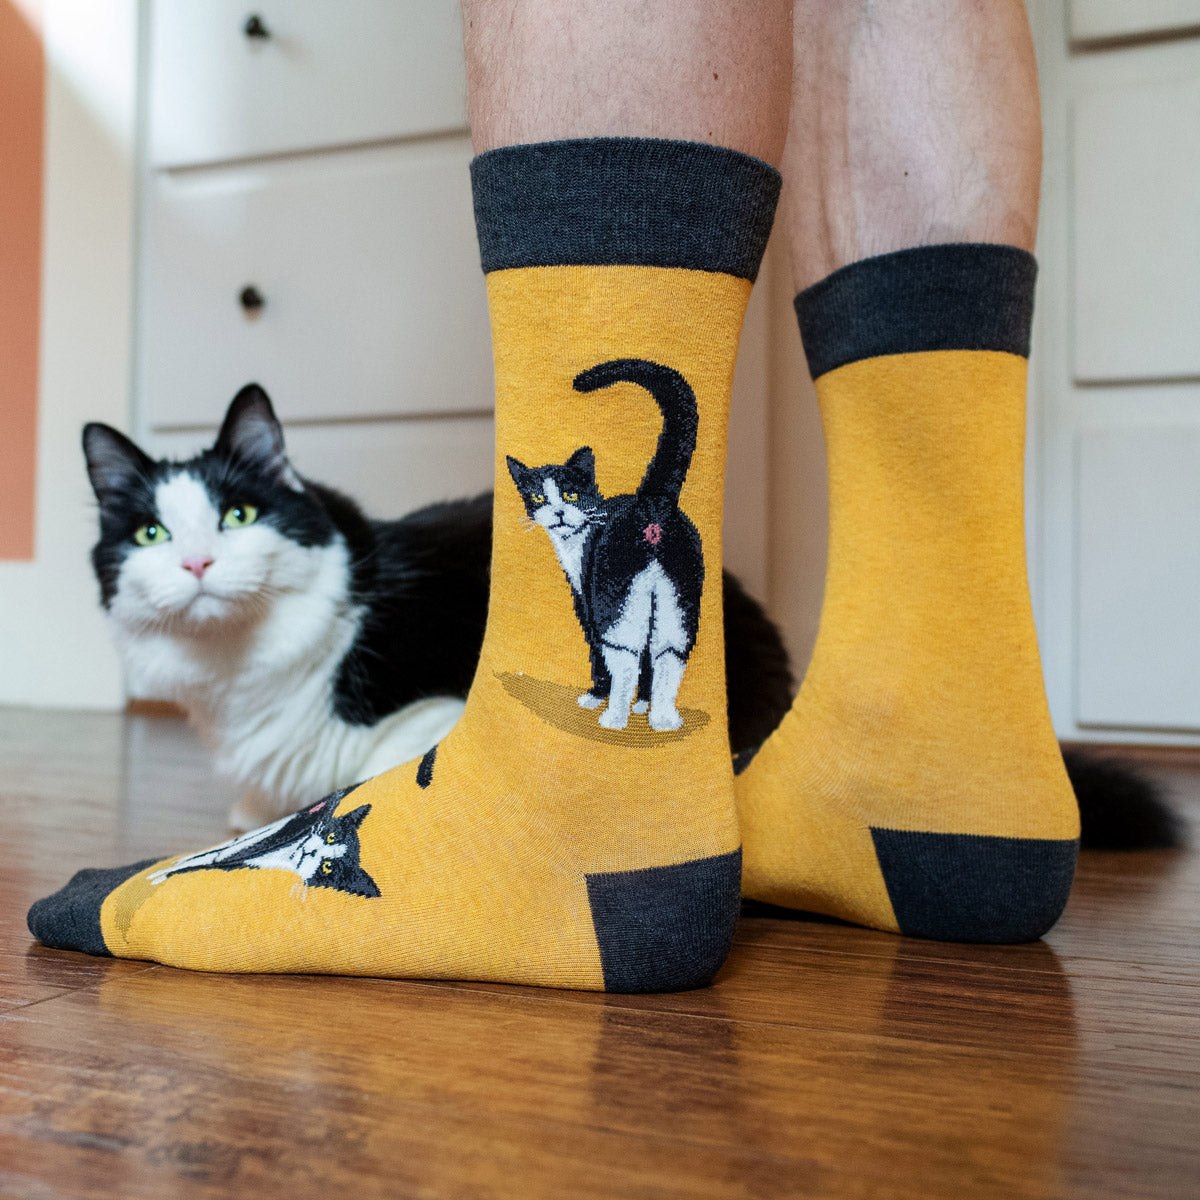 A cat watches a man in yellow men's socks with cat butts on them